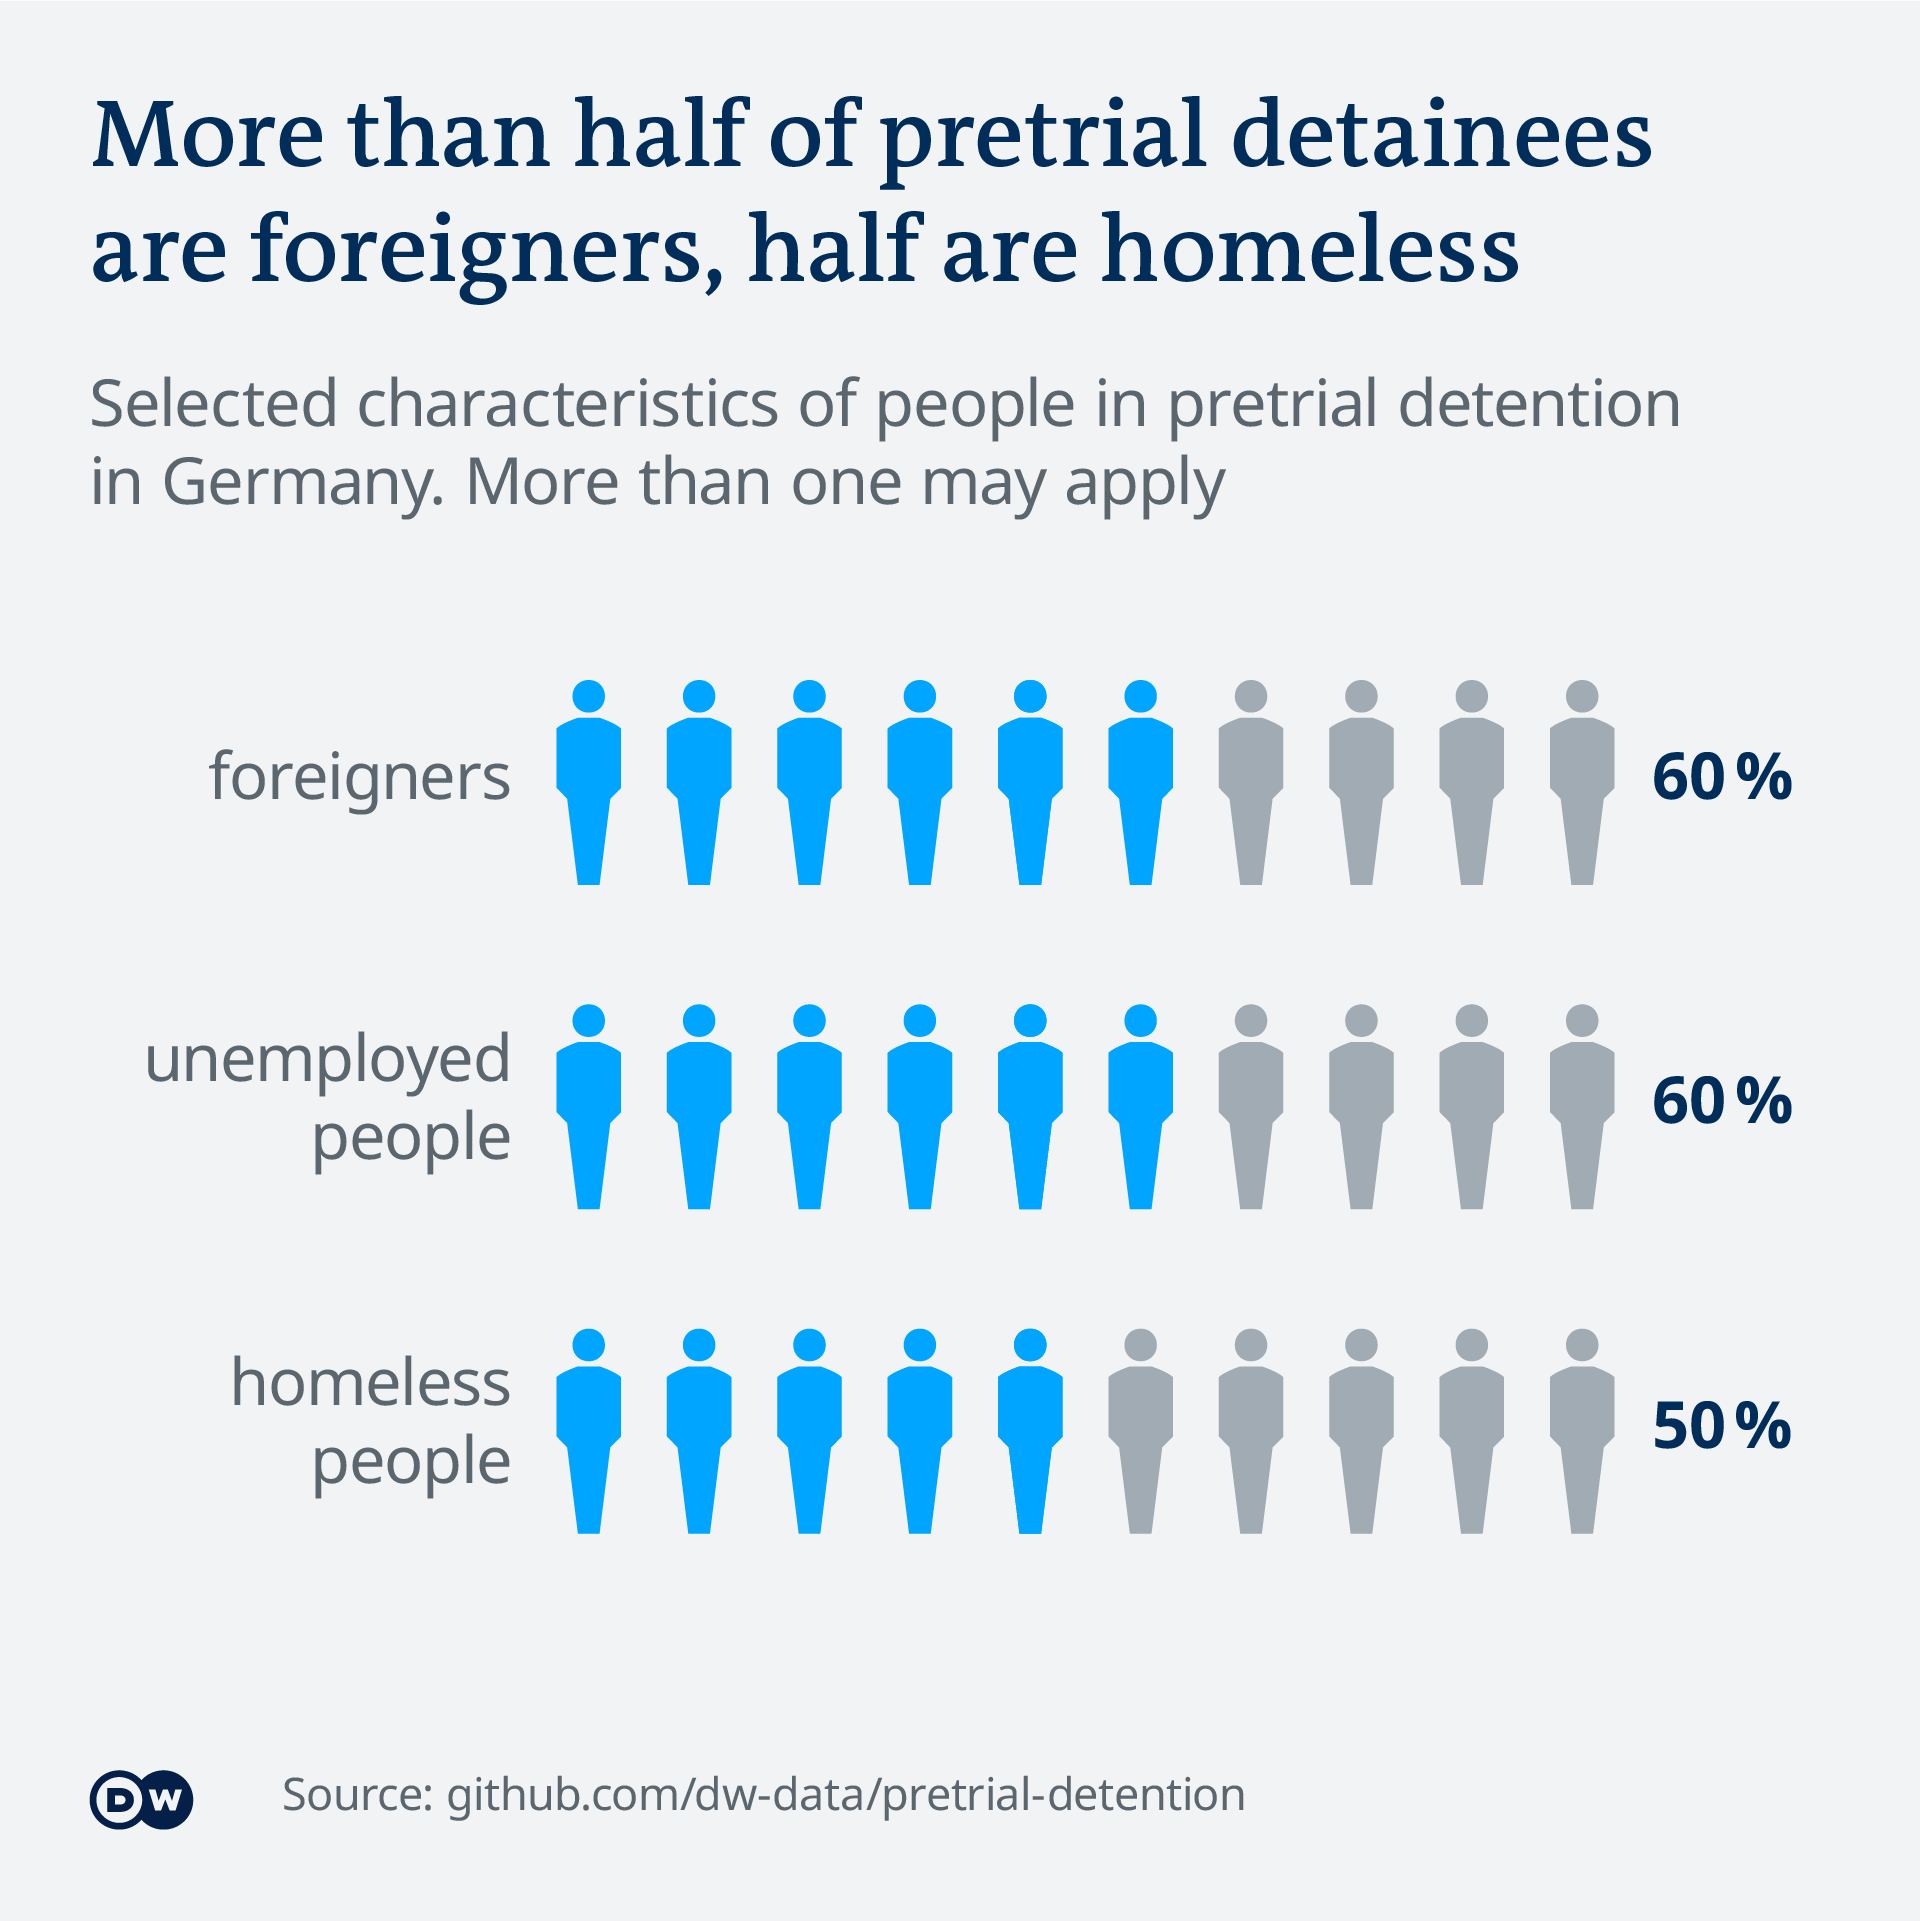 Data visualization showing that in Germany, 60% of pretrial detainees are foreigners, 60% are unemployed, and 50% are homeless.